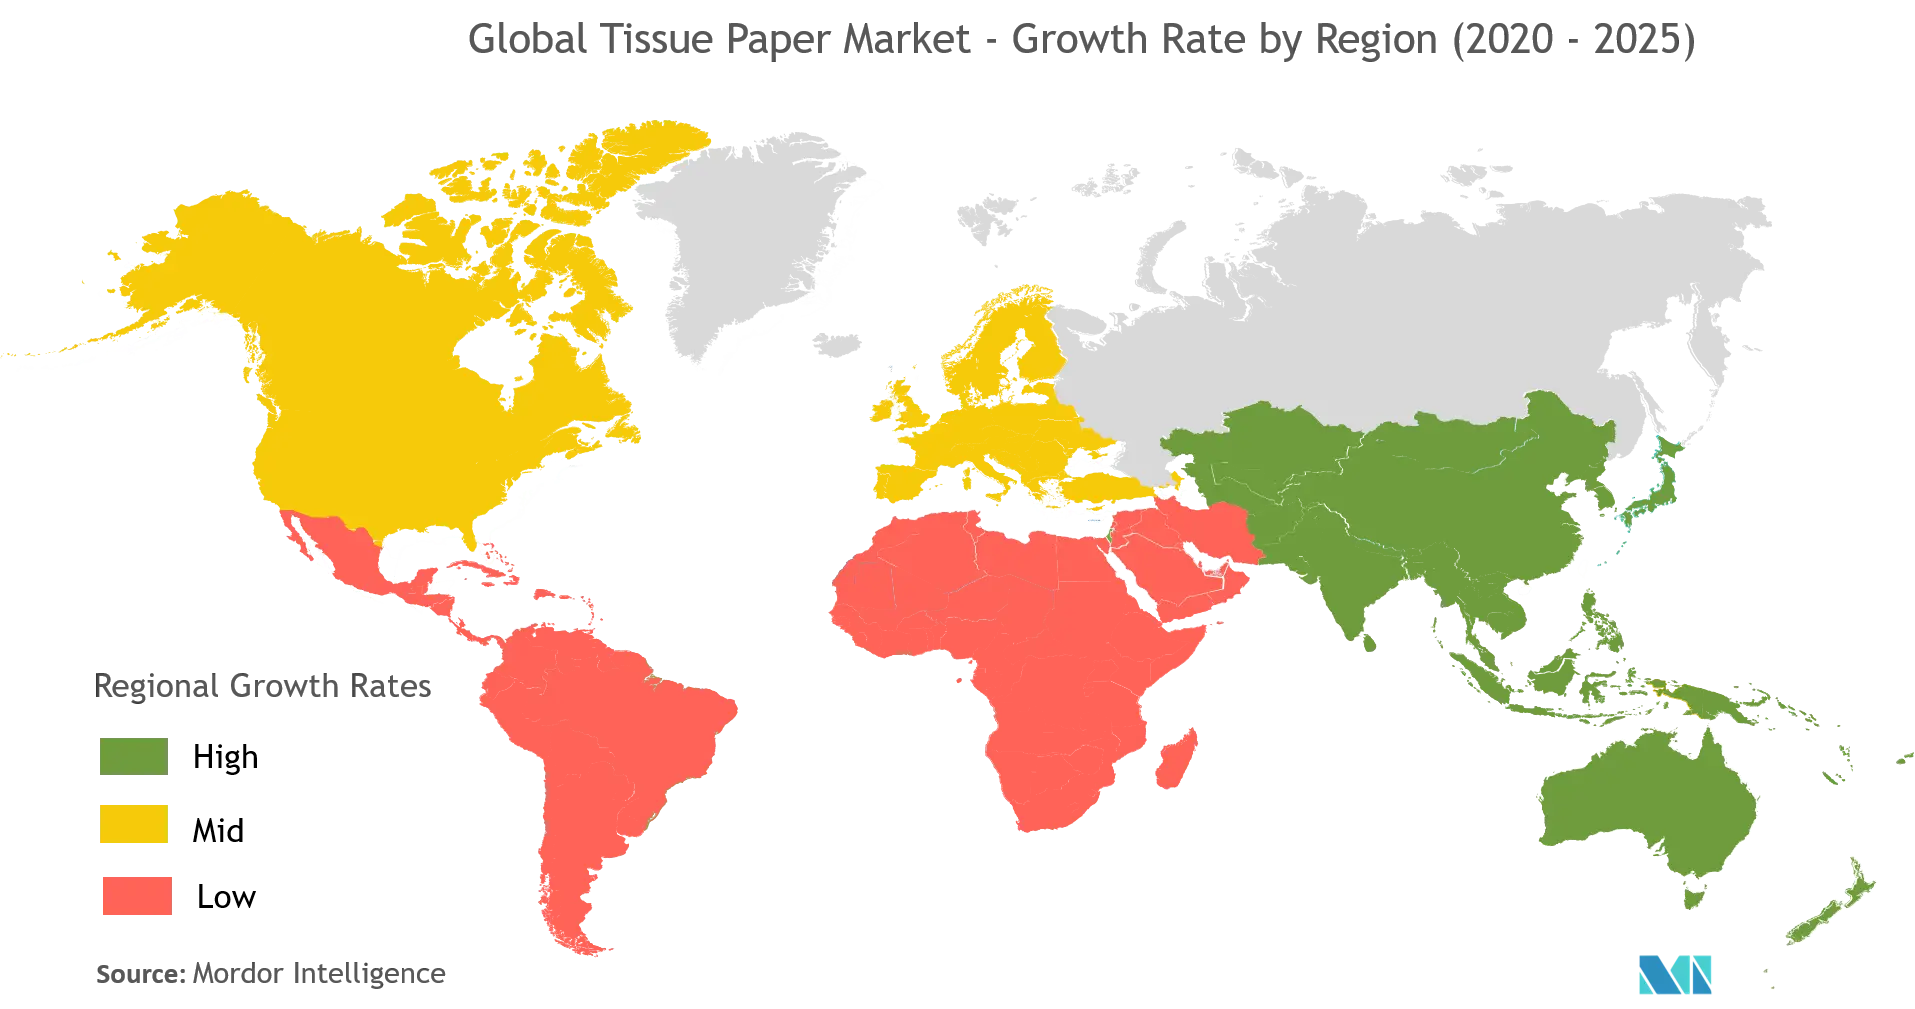 Tissue Paper Market Growth Rate